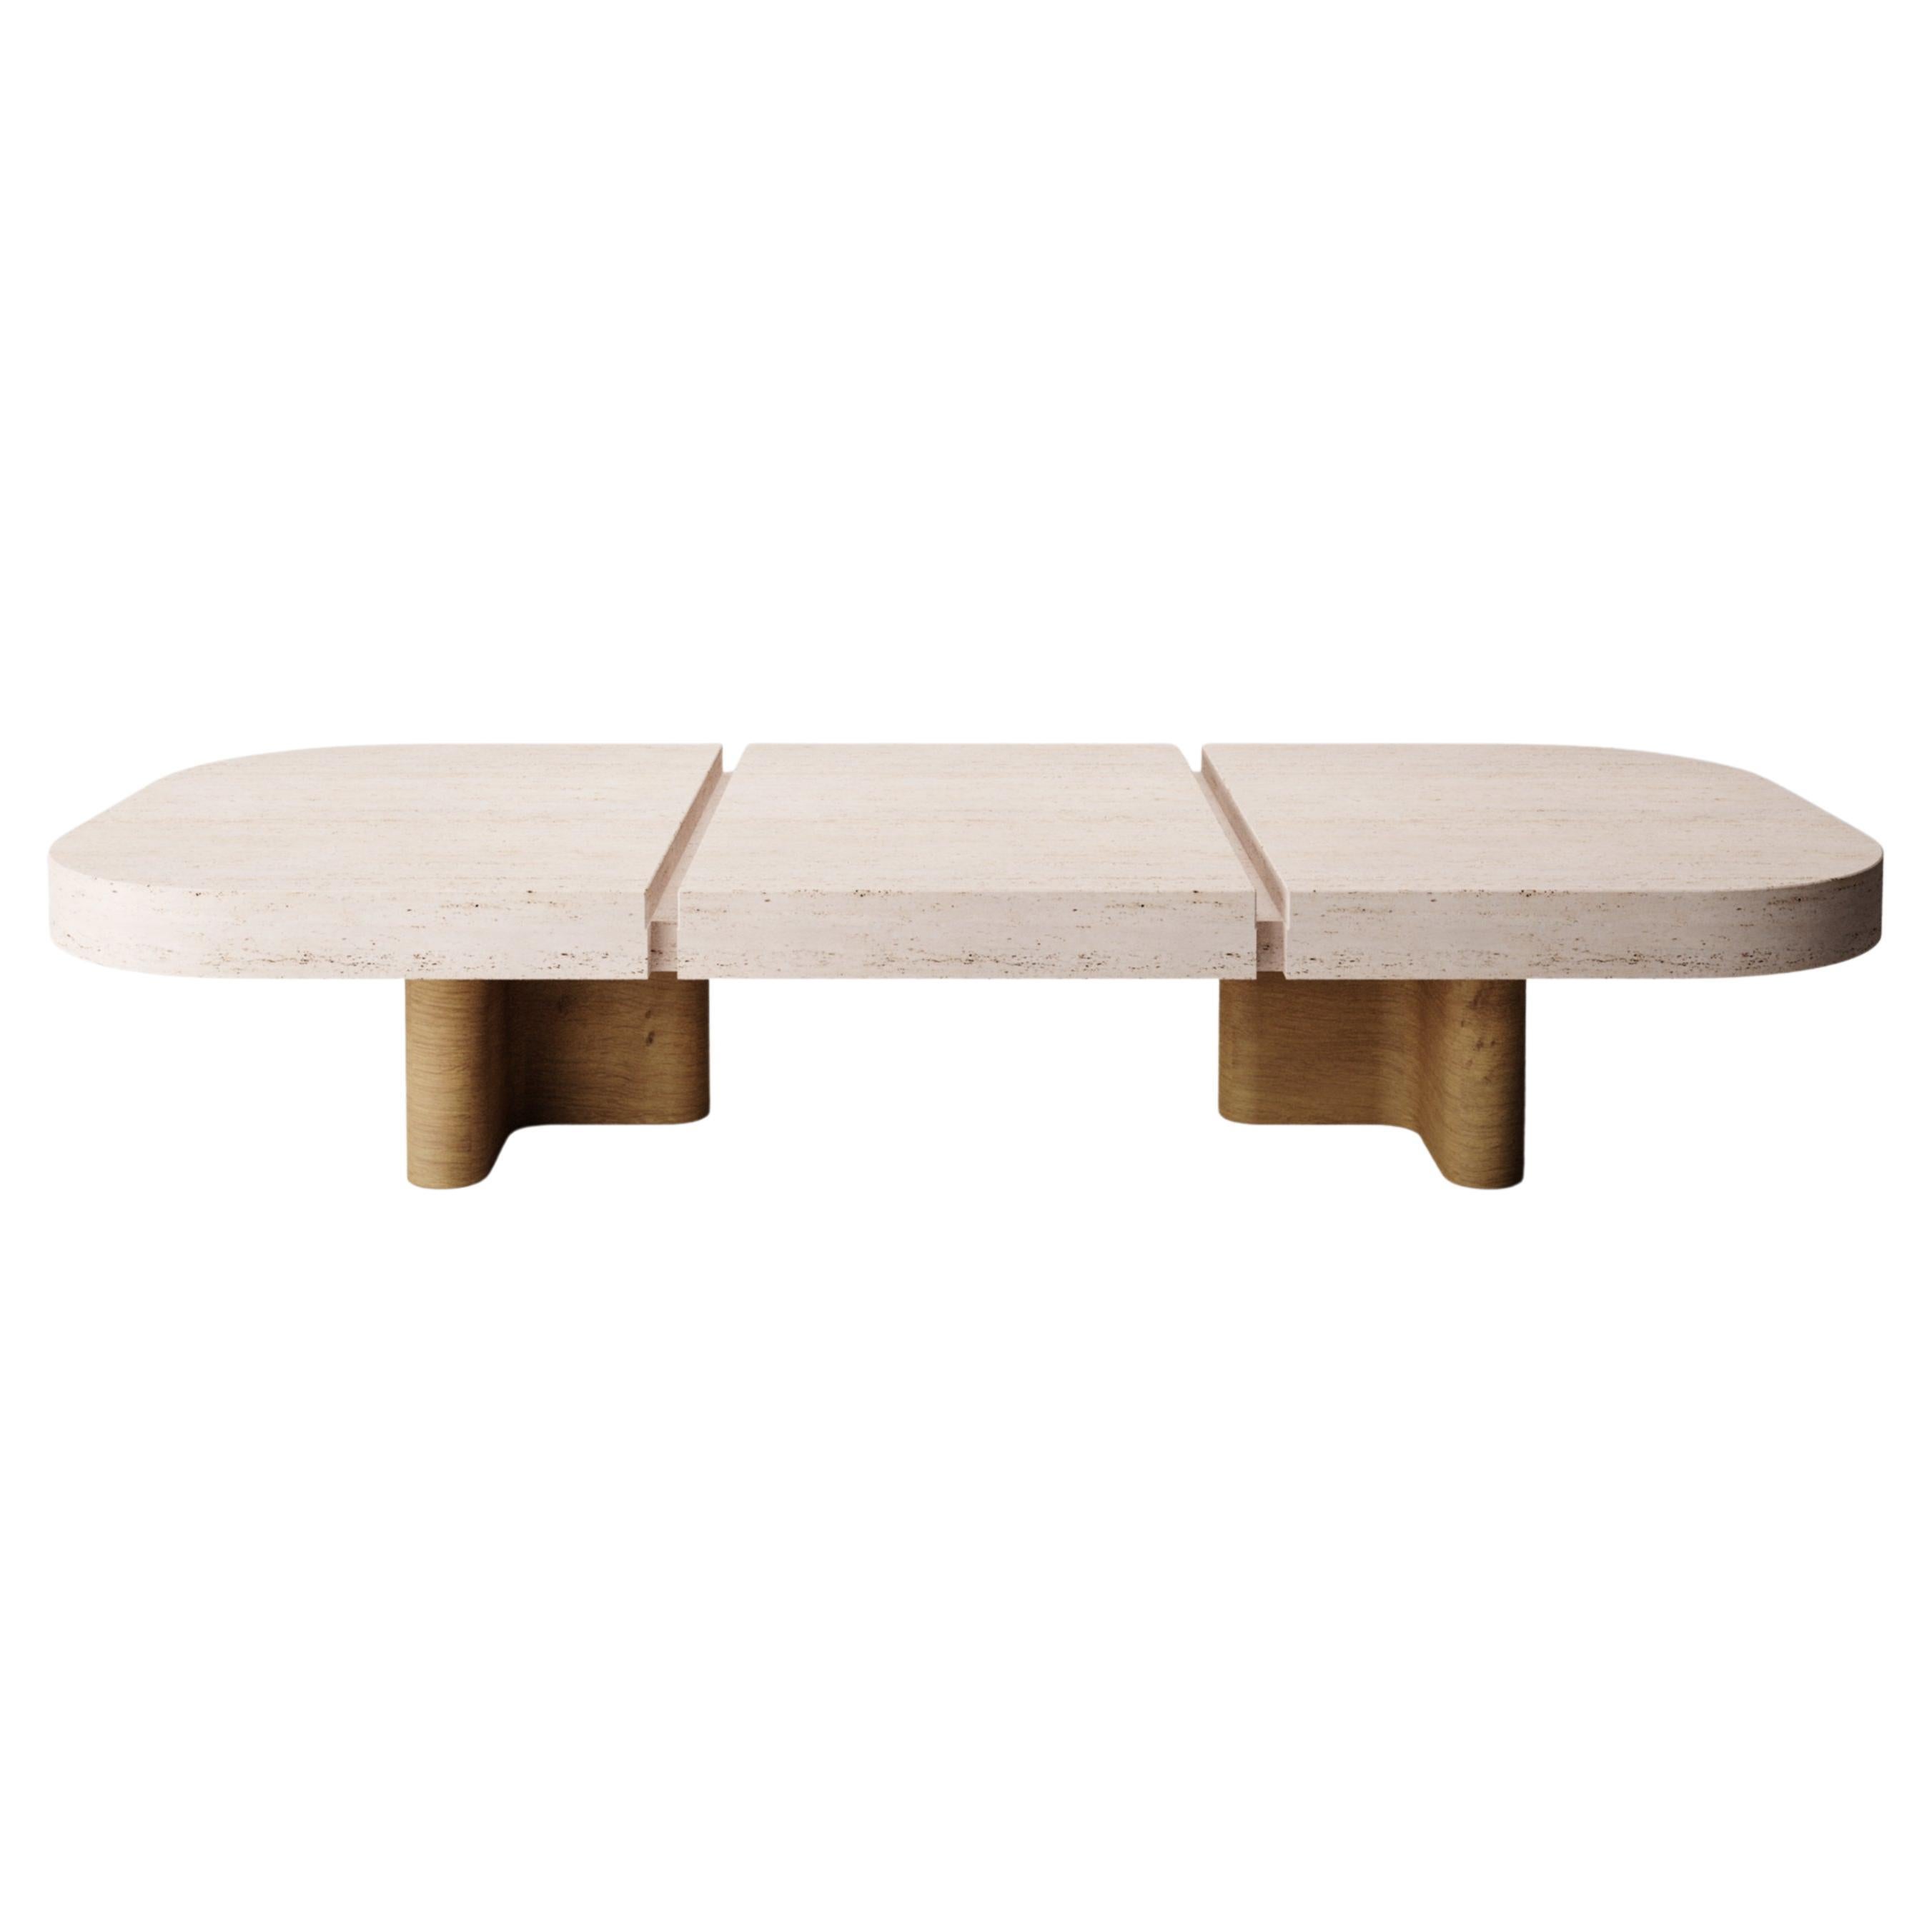 Collector -Designed by Studio Rig Meco Center Table Natural Oak and Travertino